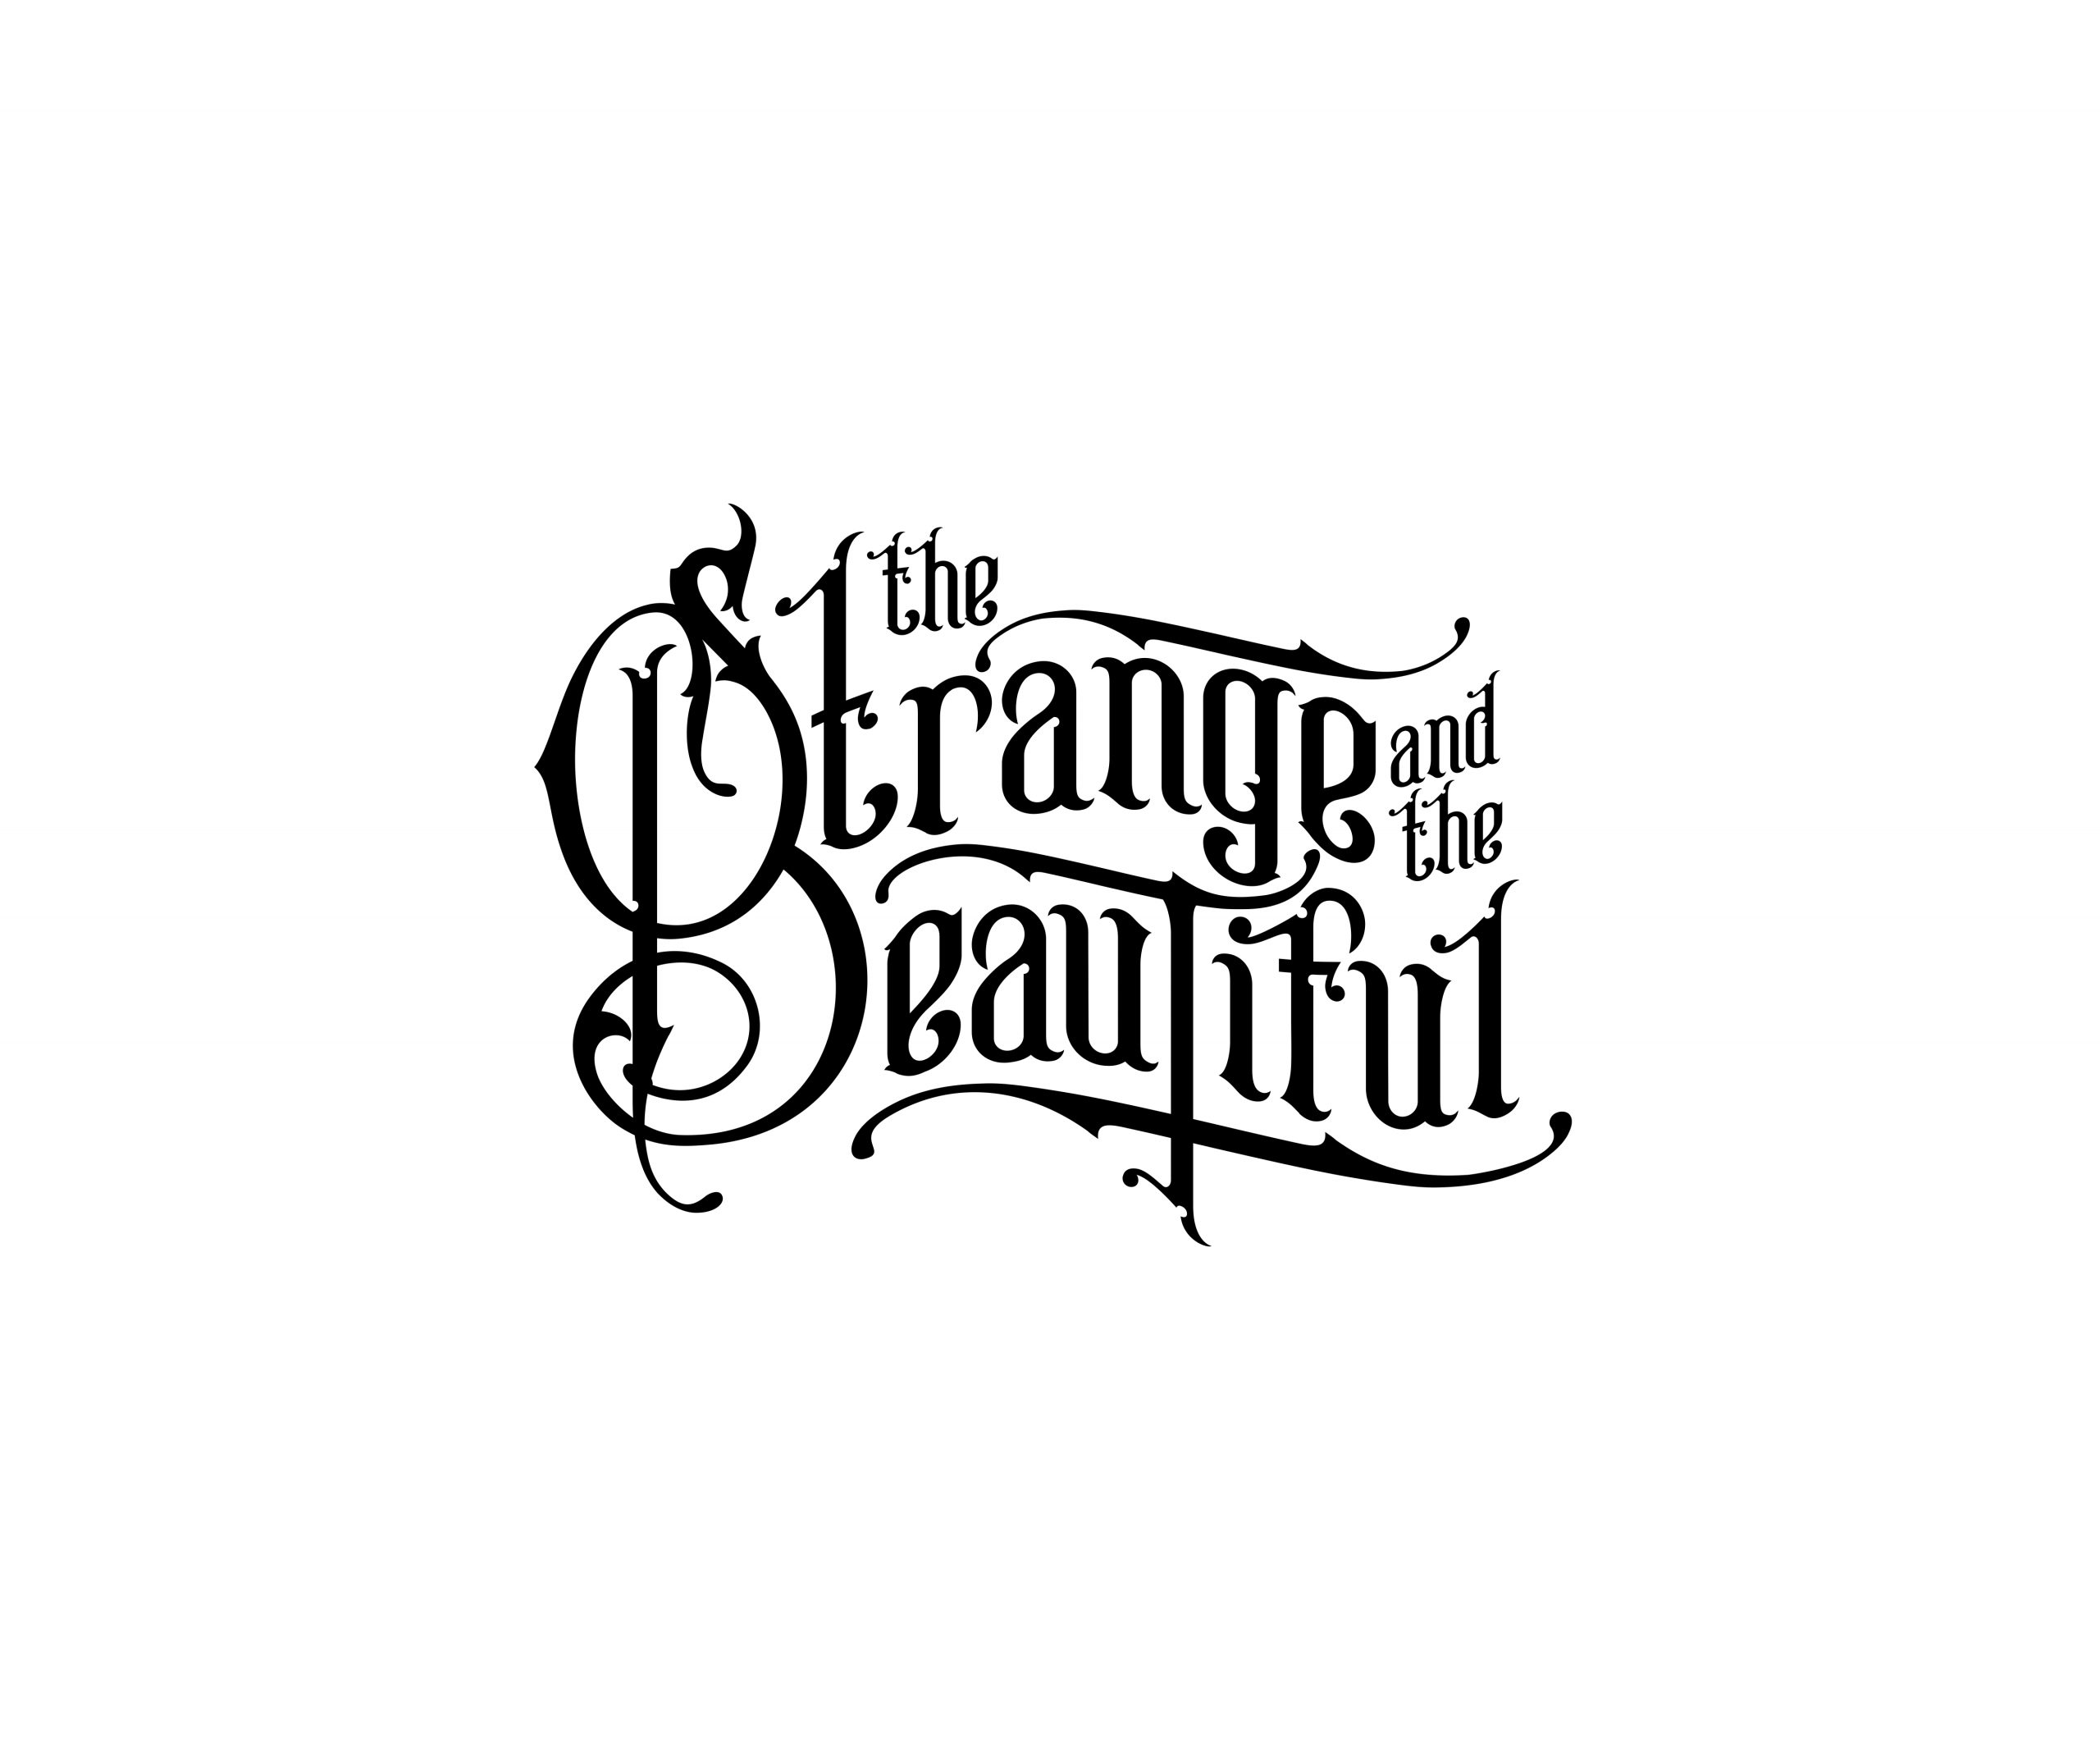 The Strange and the Beautiful